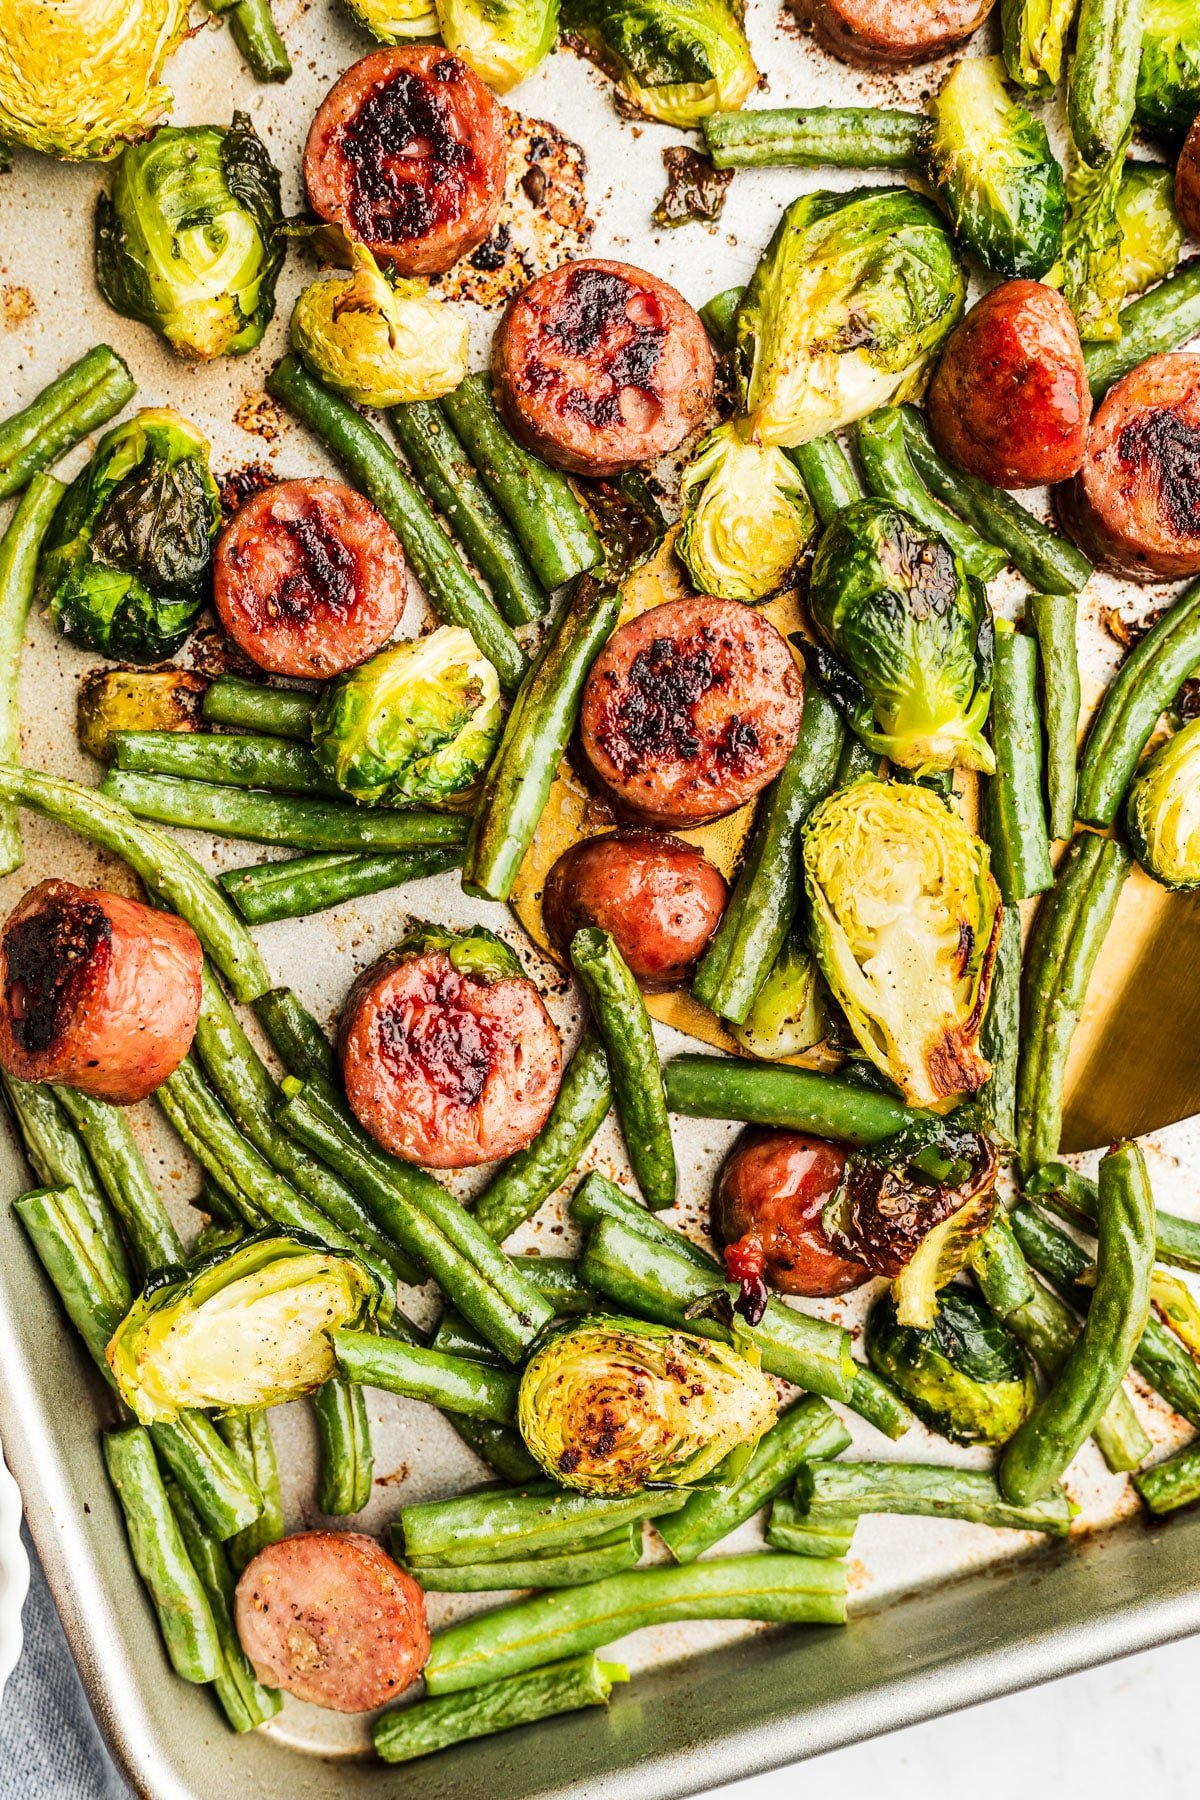 Easy Sheet Pan Sausage and Vegetables - The Whole Cook